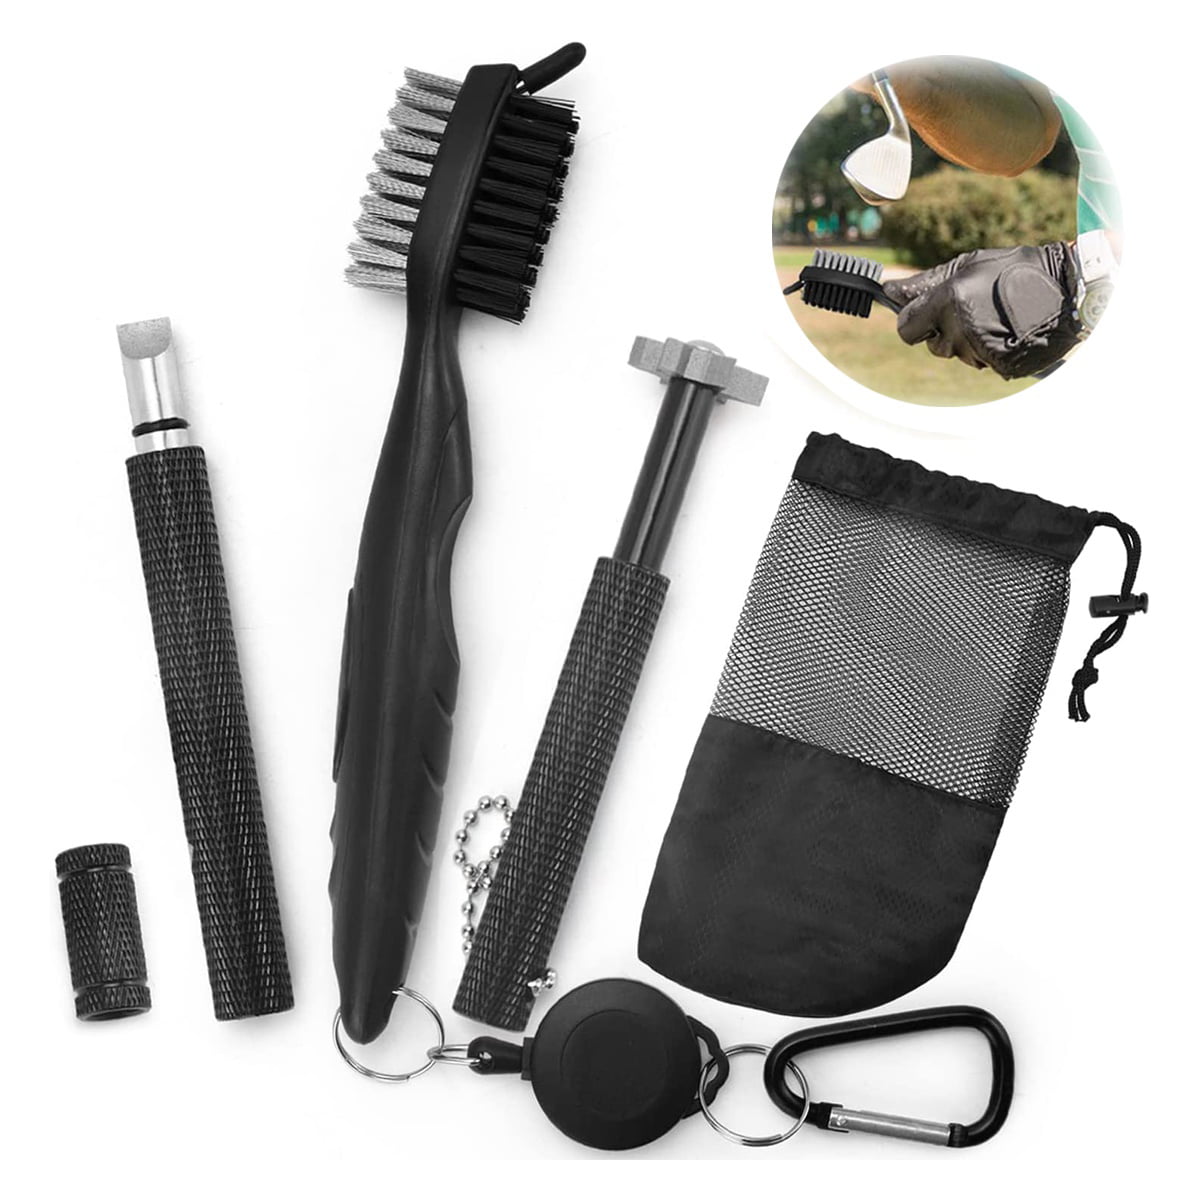  Nuanchu 10 Packs 3 In 1 Retractable Multiple Use Golf Club  Cleaner Tool Portable Golf Club Brush Golf Club Cleaning Kit